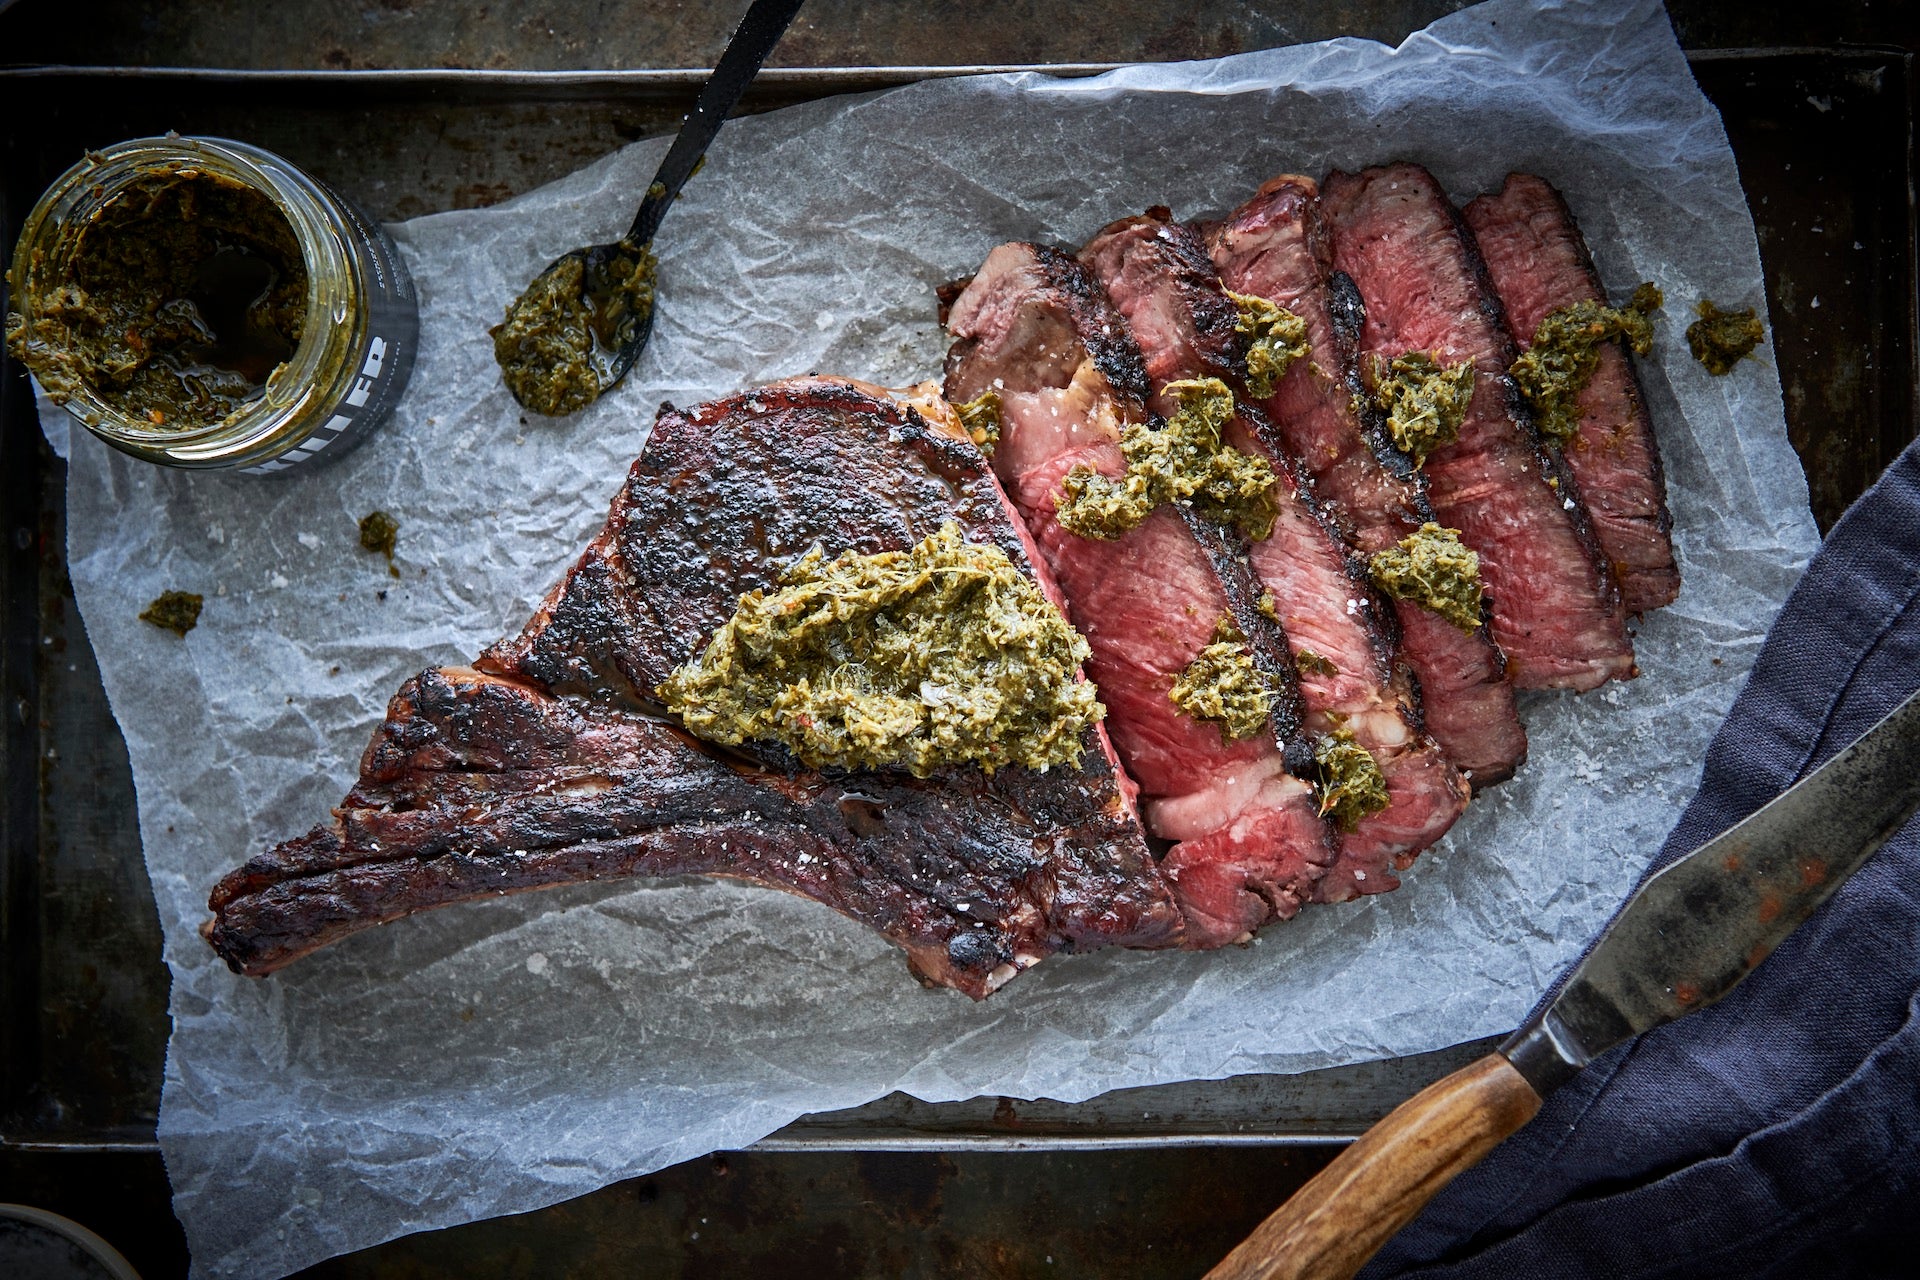 Medium rare rib eye steak elegantly sliced and drizzled with Killer Condiments Chimichurri, adding a vibrant and bold flavor to a classic dish - a perfect find for adventurous food bloggers and gourmet home chefs